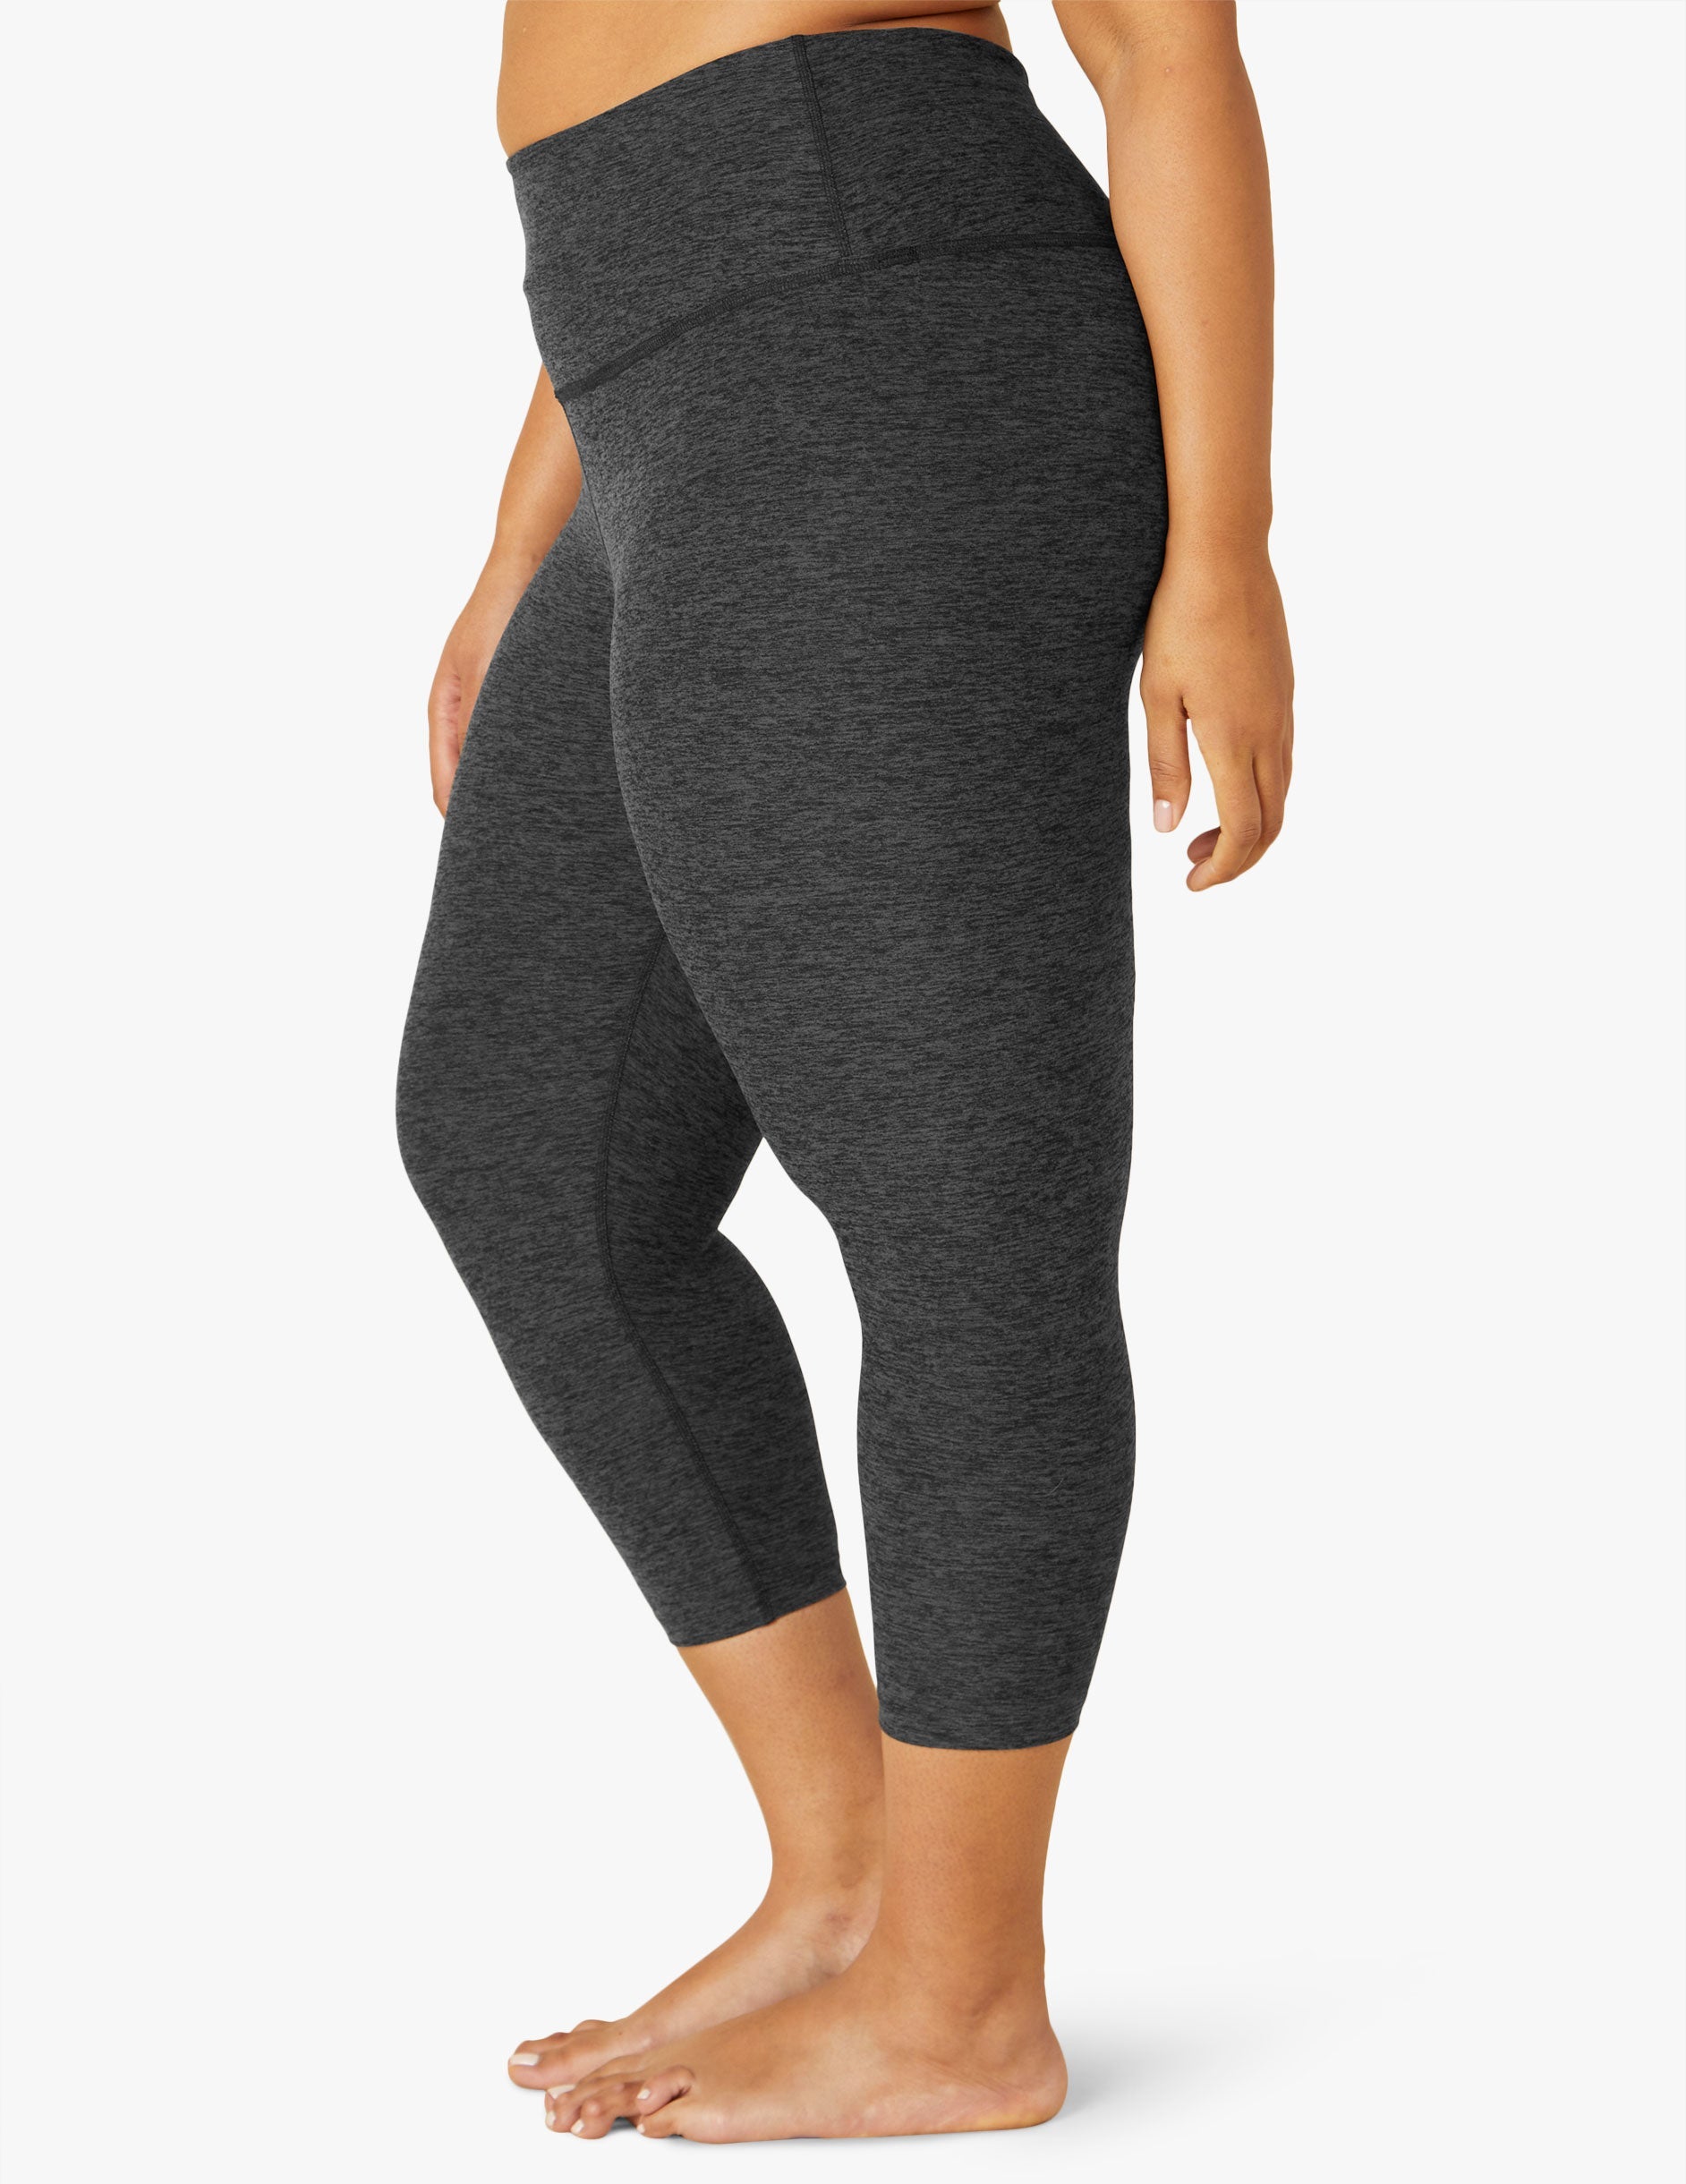  VALANDY Buttery Soft High Waisted Cropped Leggings for Women in  Regular and Plus Size Capri Length Yoga Pants Navy Blue : Sports & Outdoors